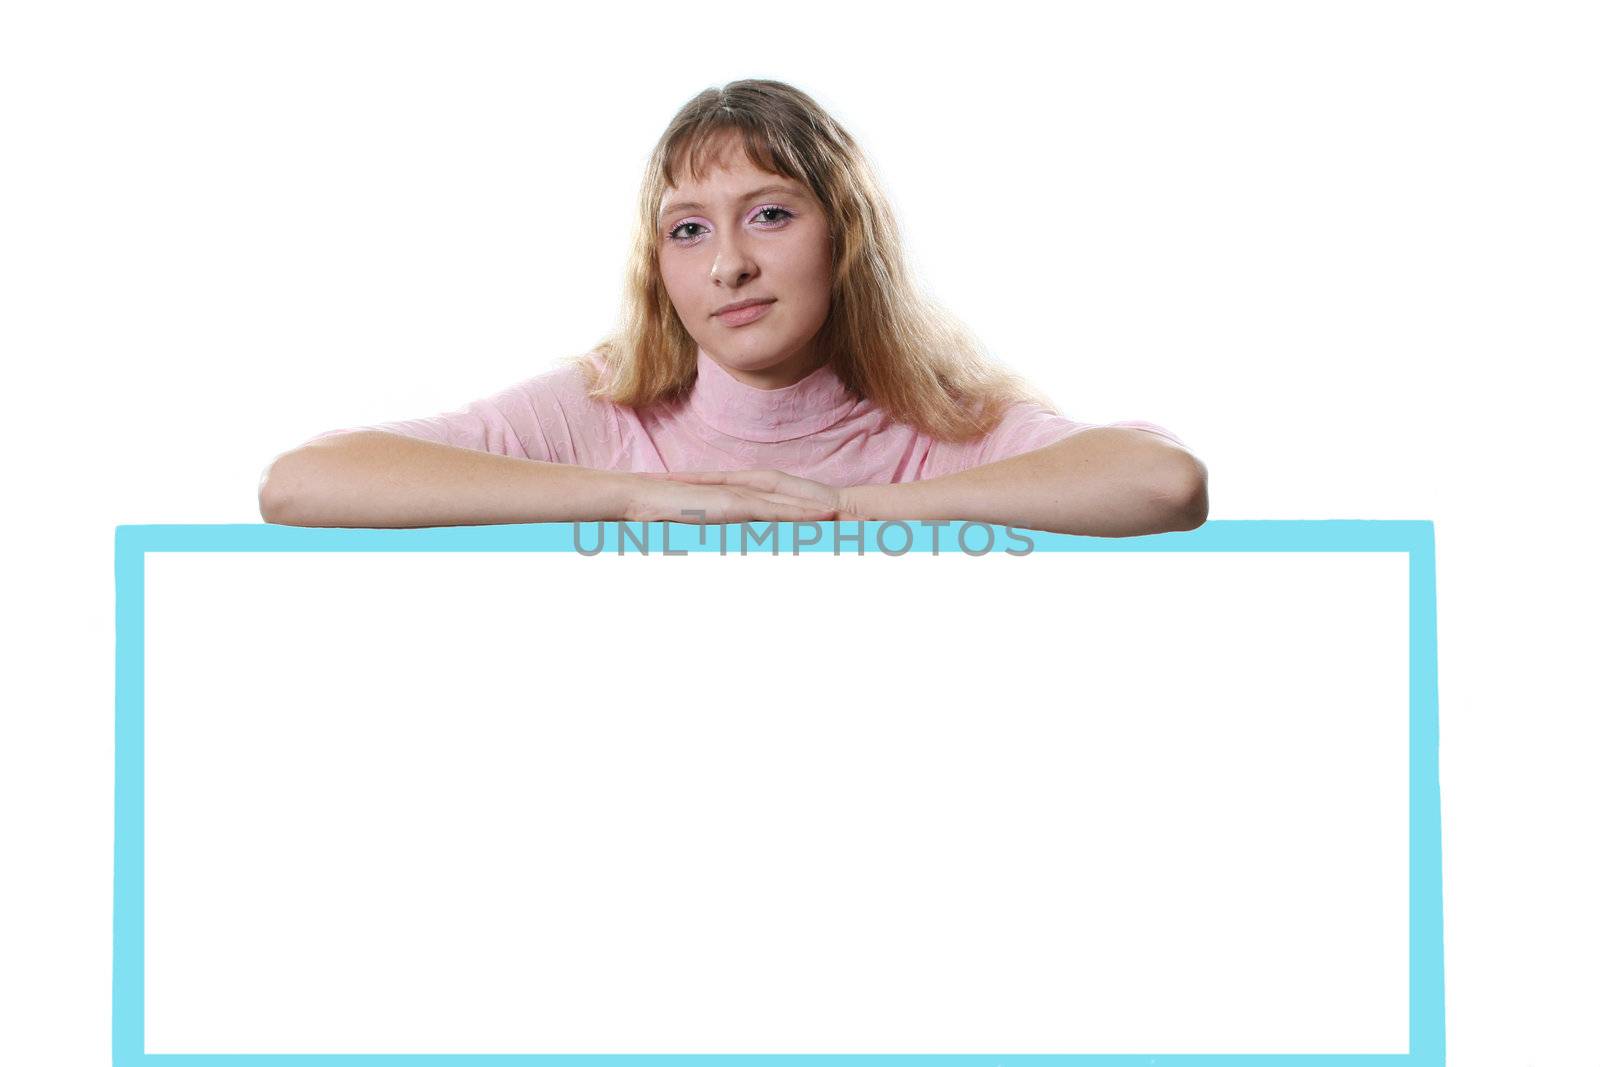 The beautiful girl on the board on a white background